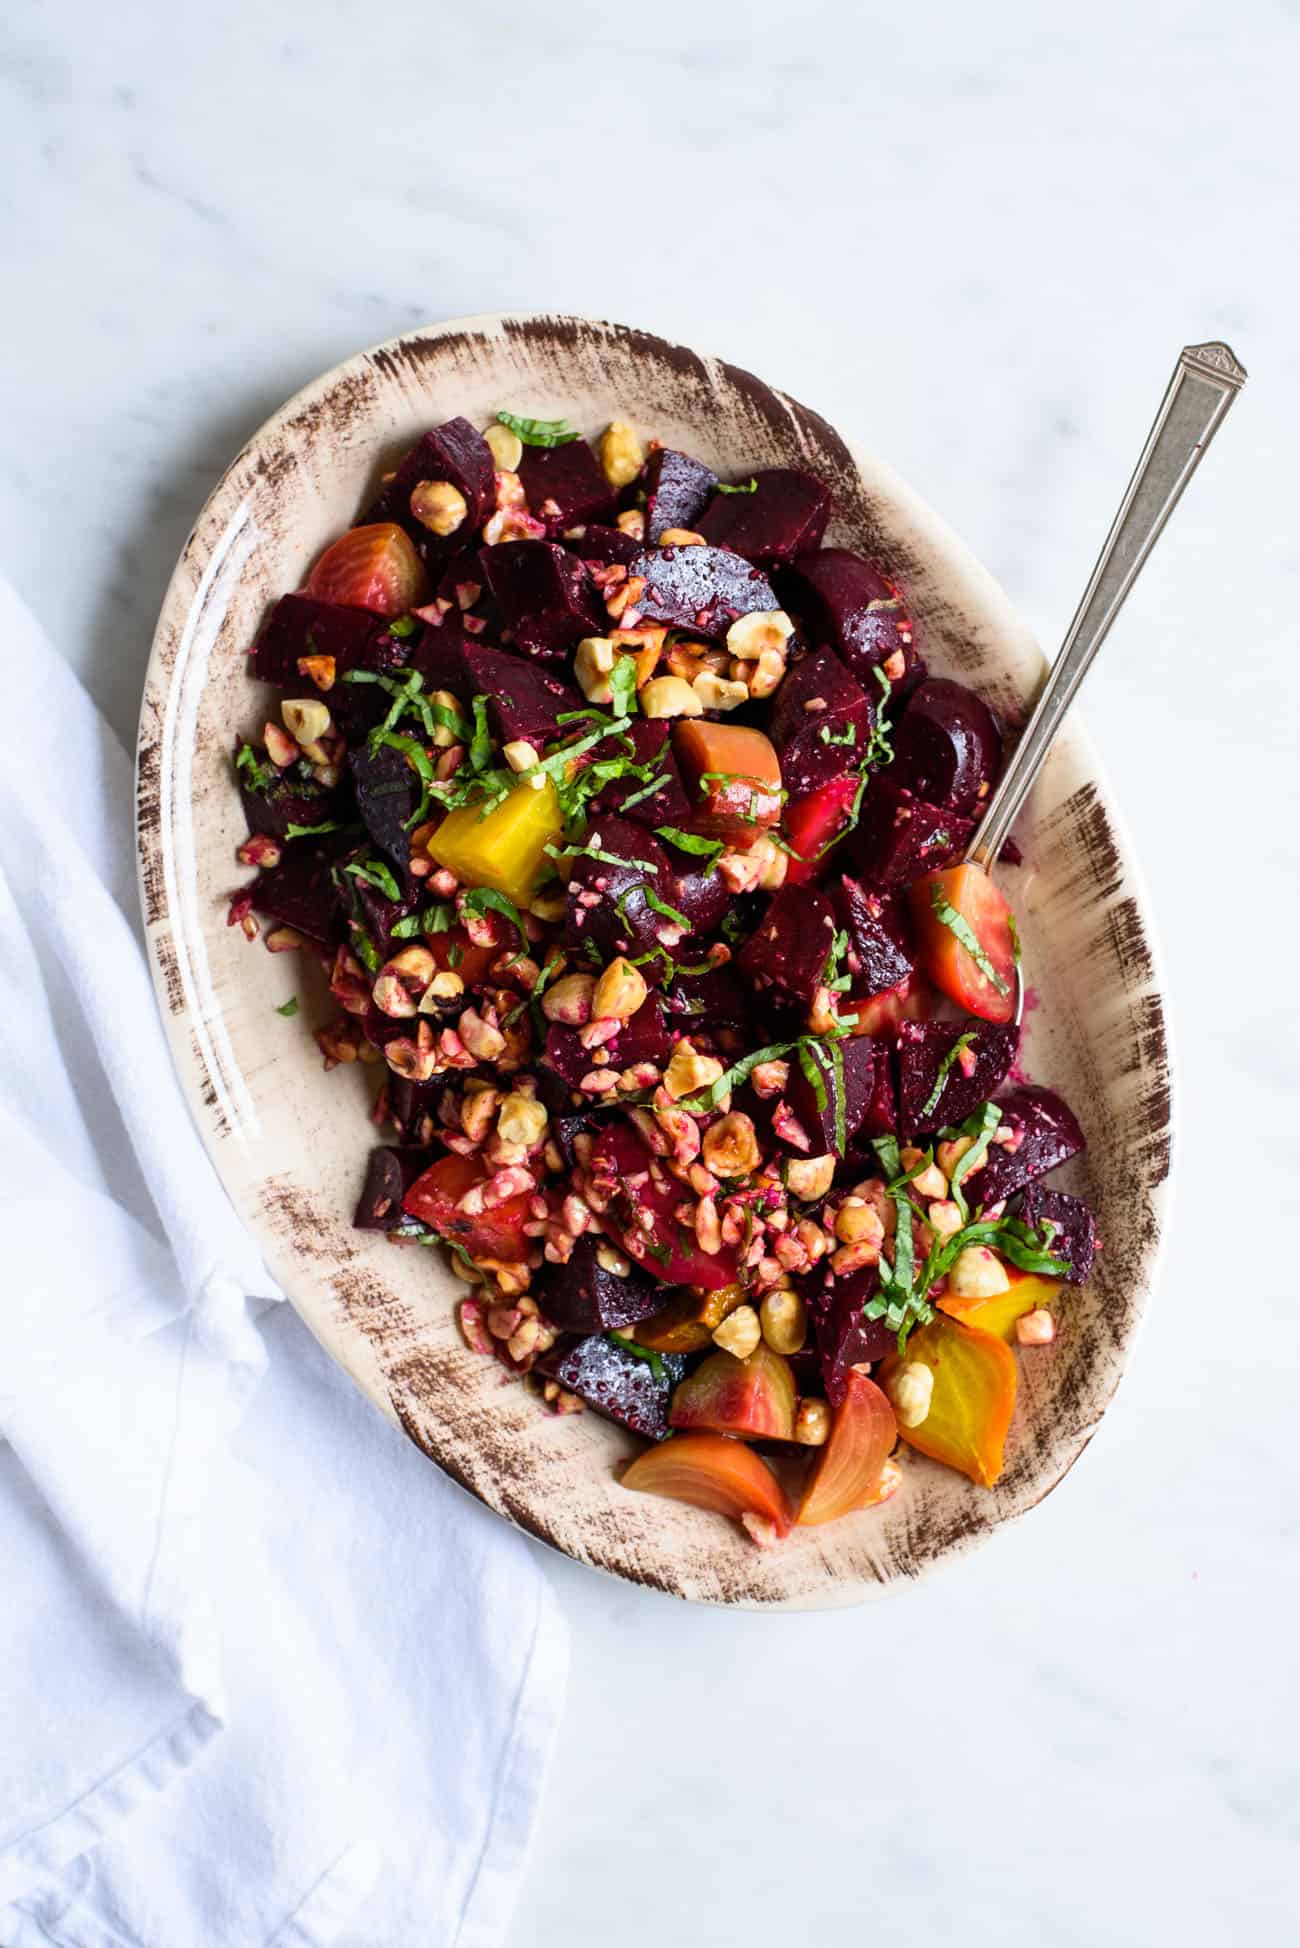 An easy beet side dish: Rainbow Beets with Hazelnuts and Basil